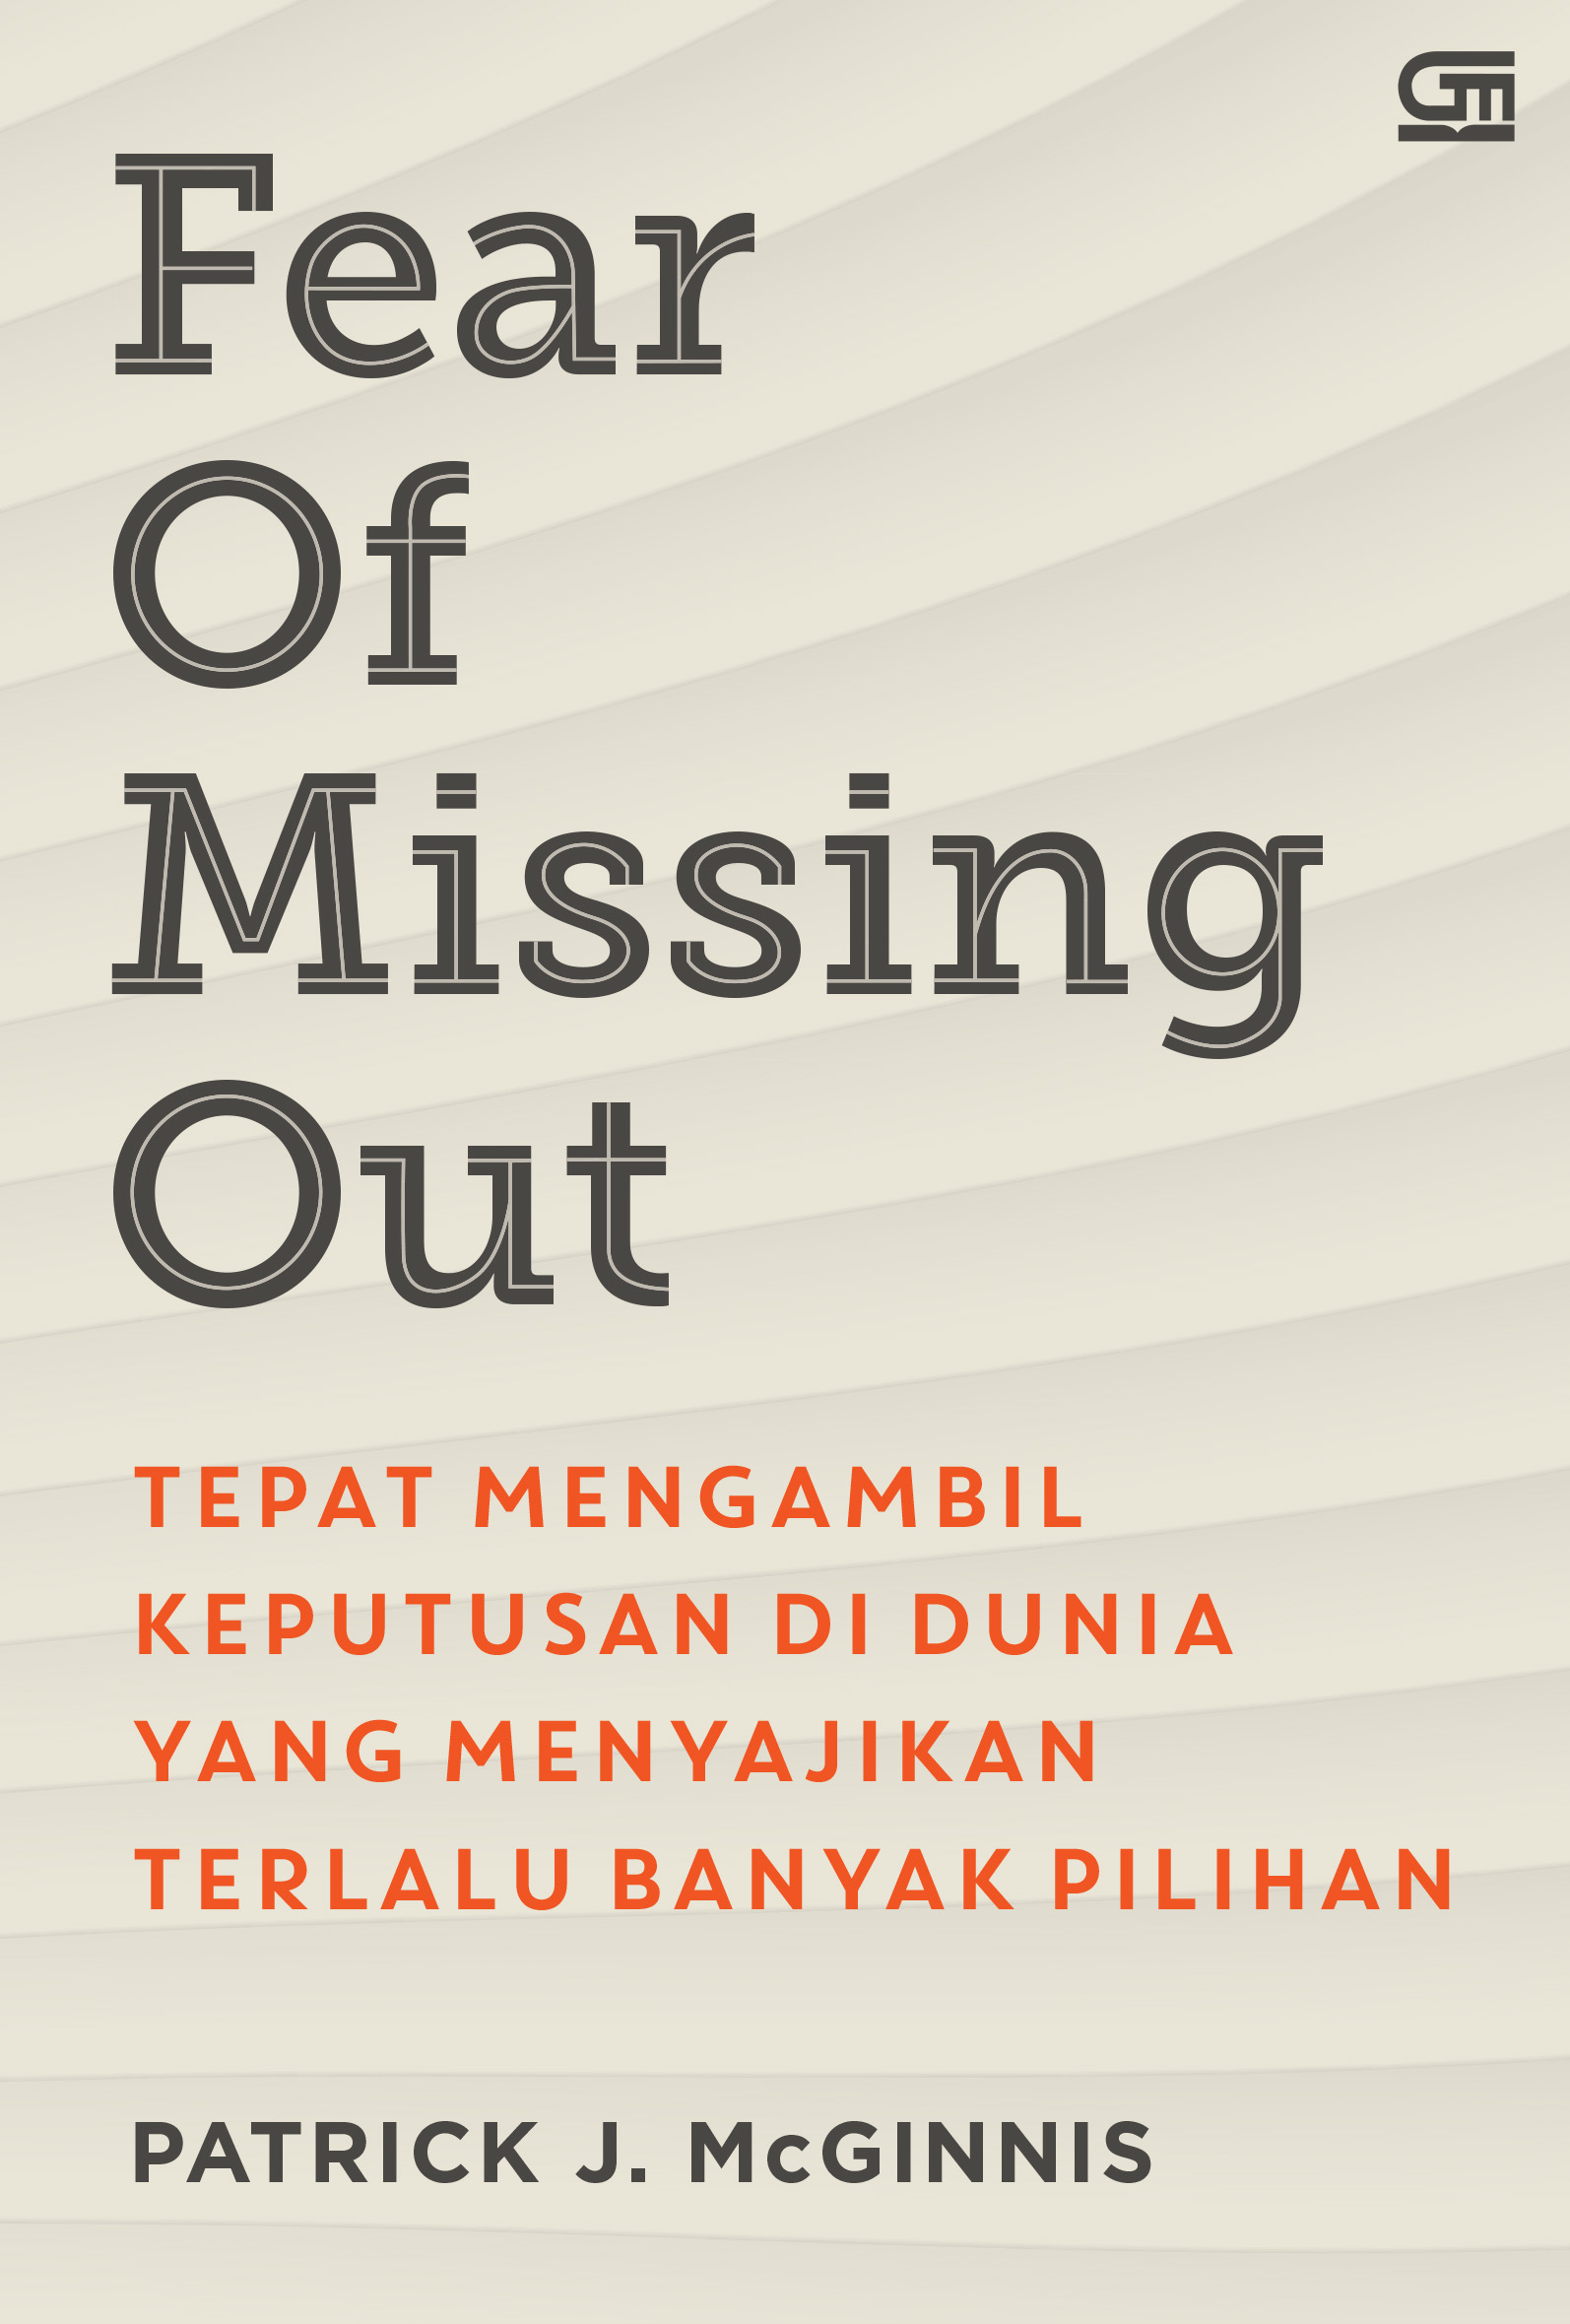 Fear of missing out artinya